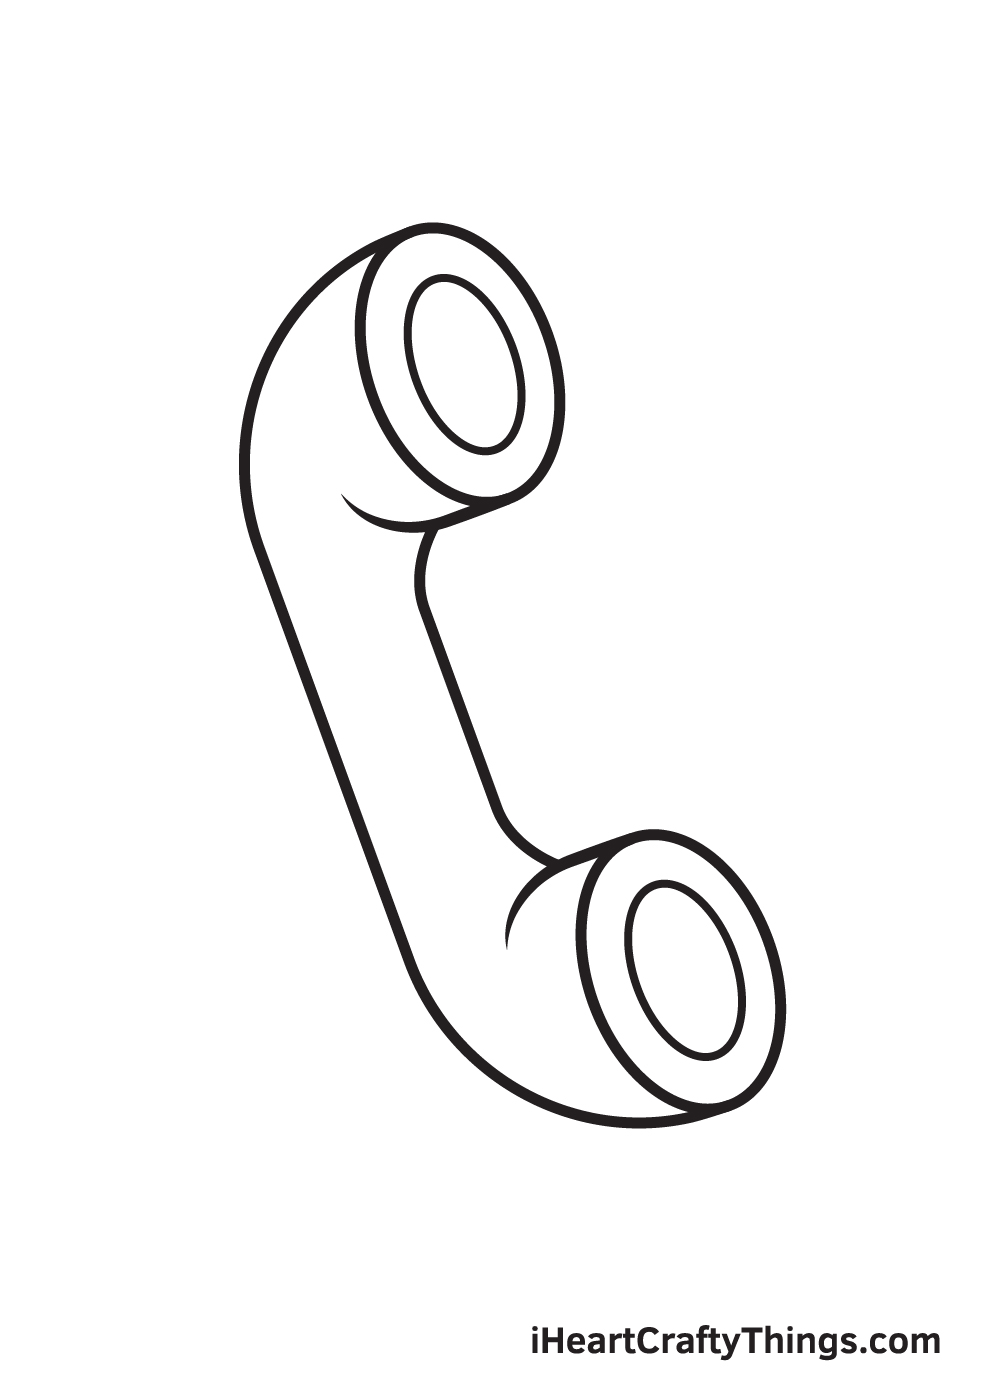 How to Draw a Phone